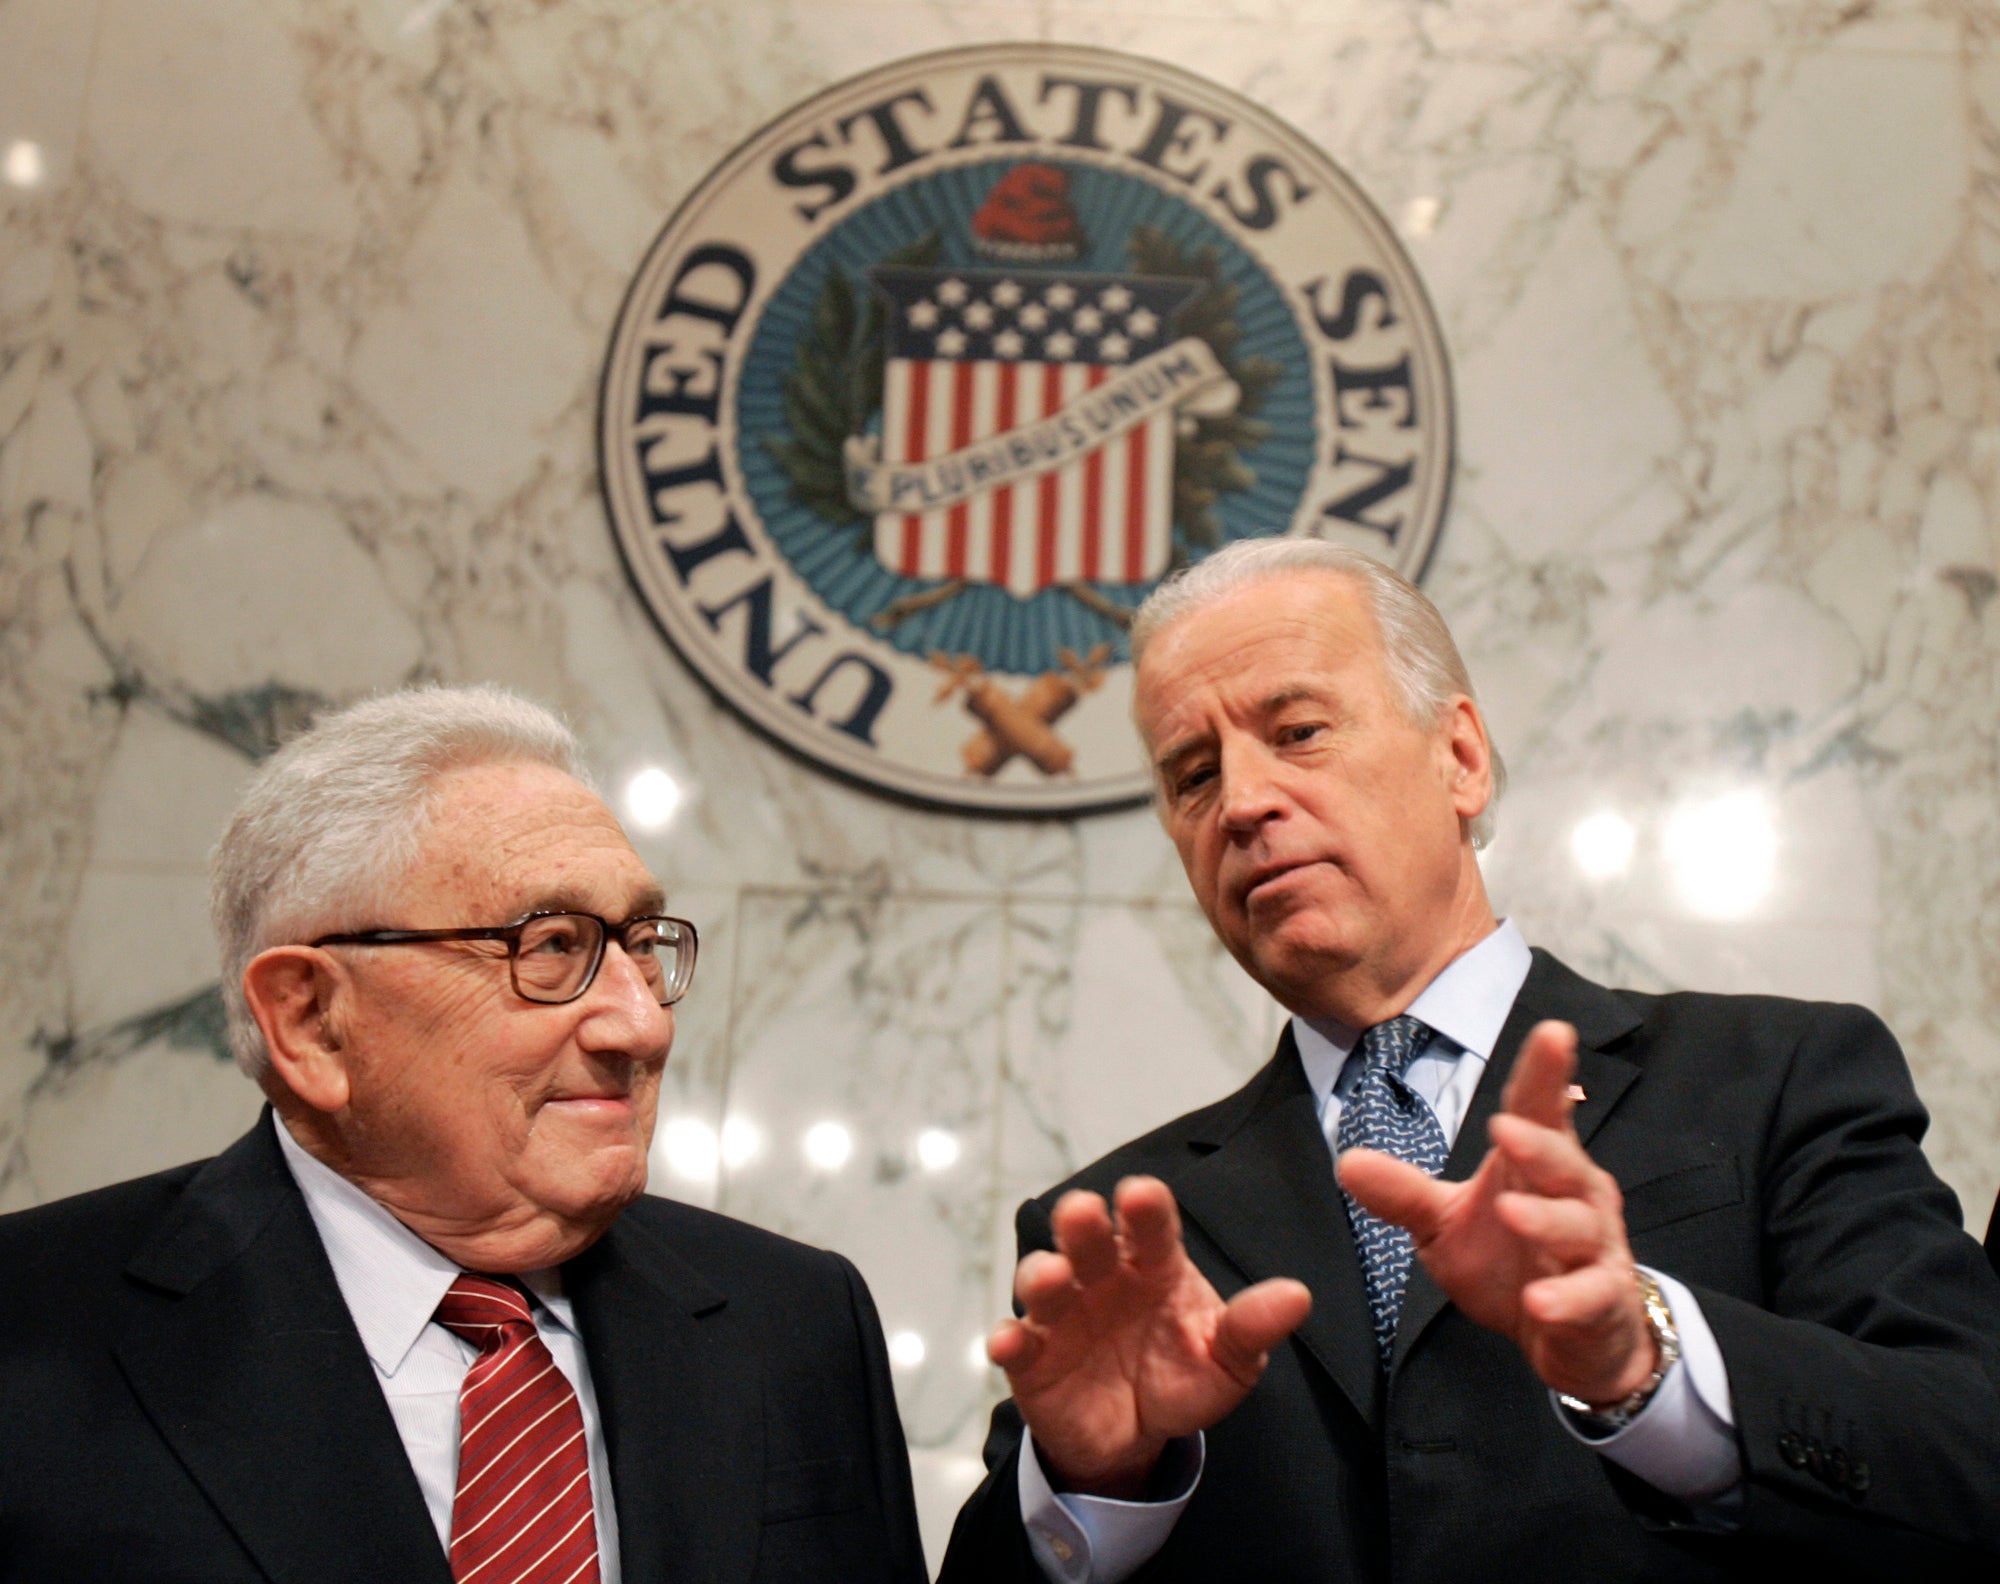 Former Secretary of State Henry Kissinger, left, talks with Senate Foreign Relations Committee Chairman Sen. Joseph Biden, D-Del., on Capitol Hill in Washington, Jan. 31, 2007, prior to Kissinger testifying before the committee about Iraq.